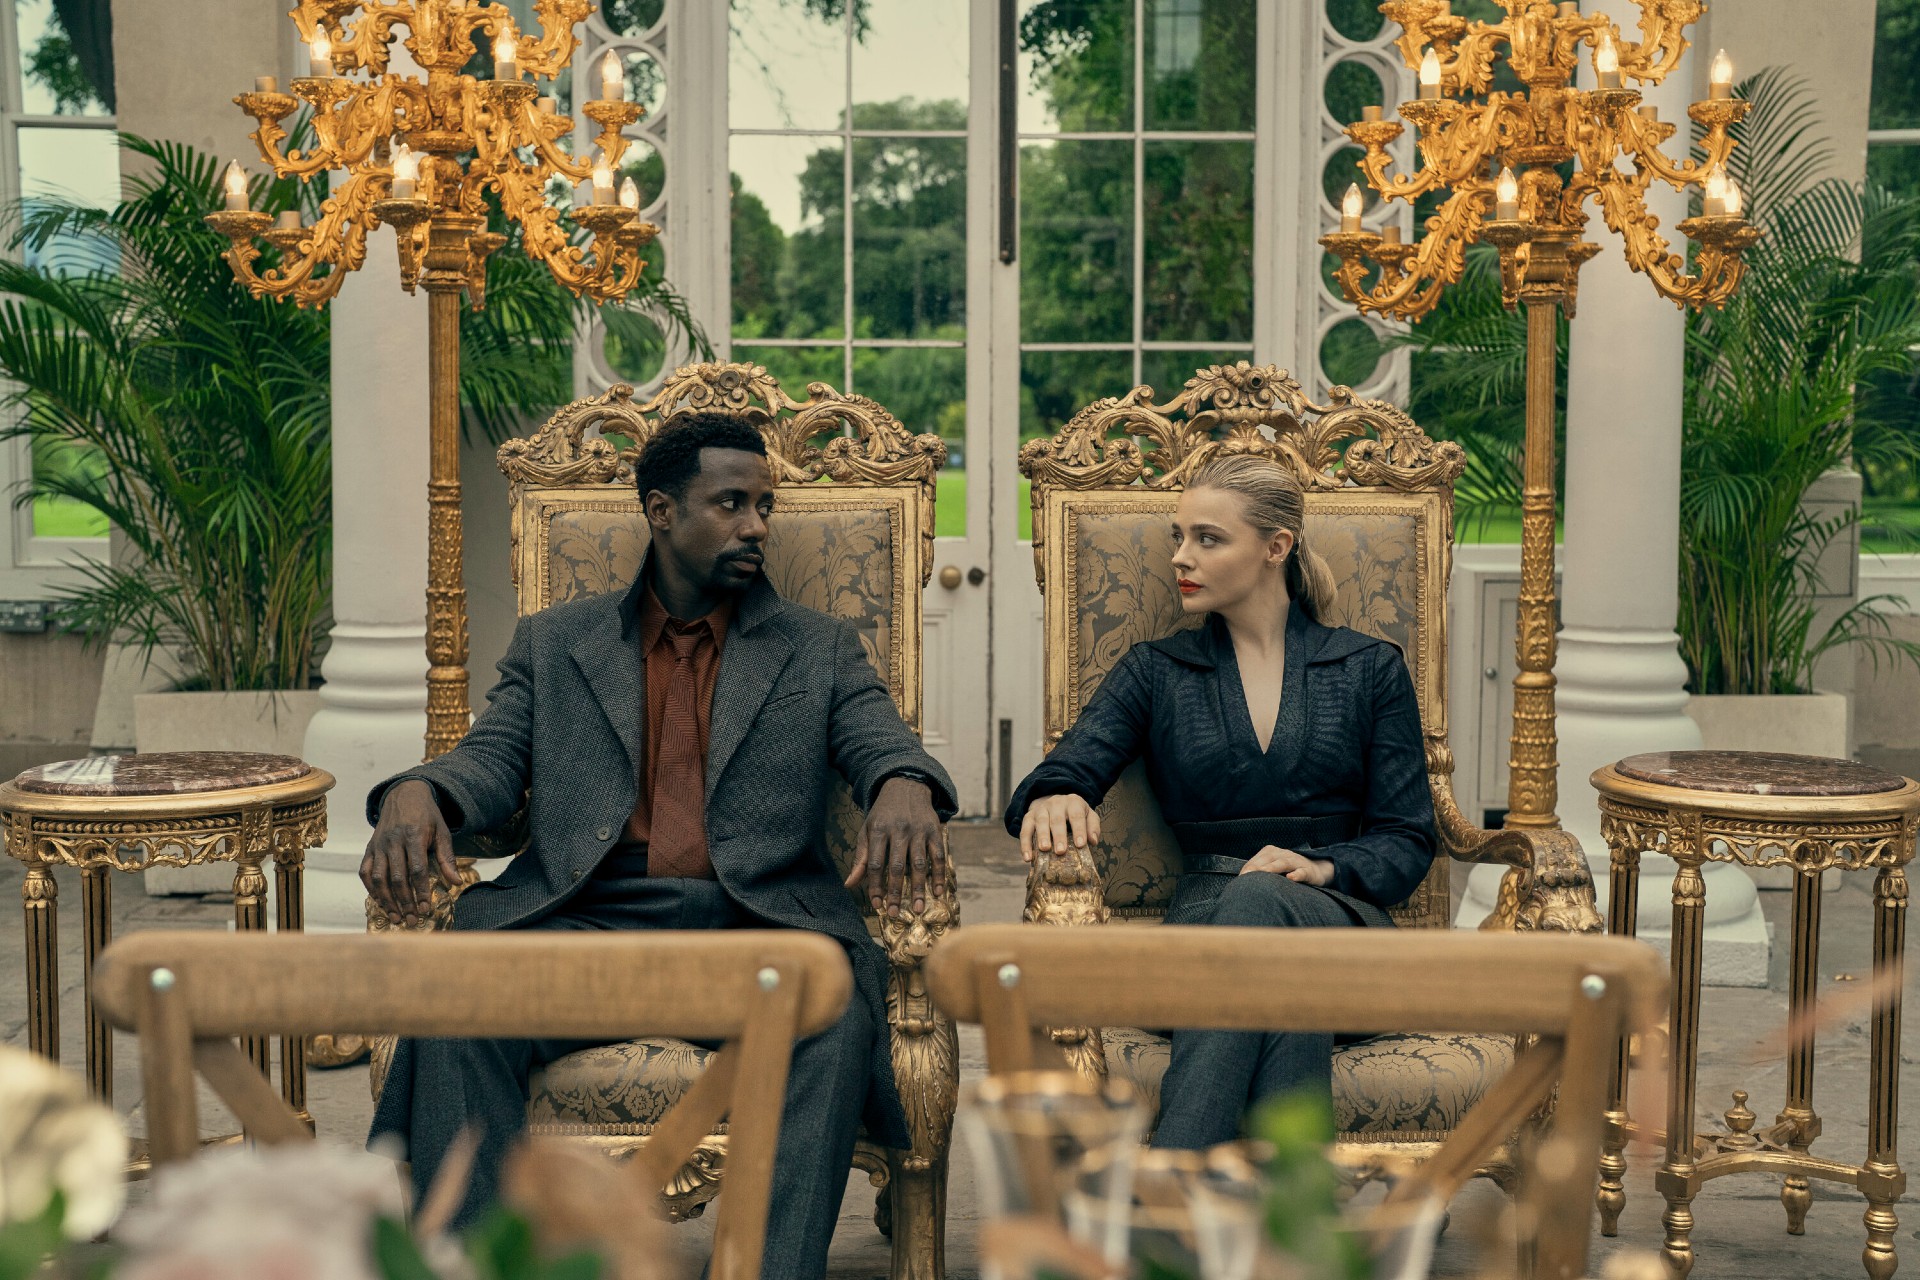 Gary Carr and Chloe Grace Moretz stare at each other while seated in a scene from The Peripheral.